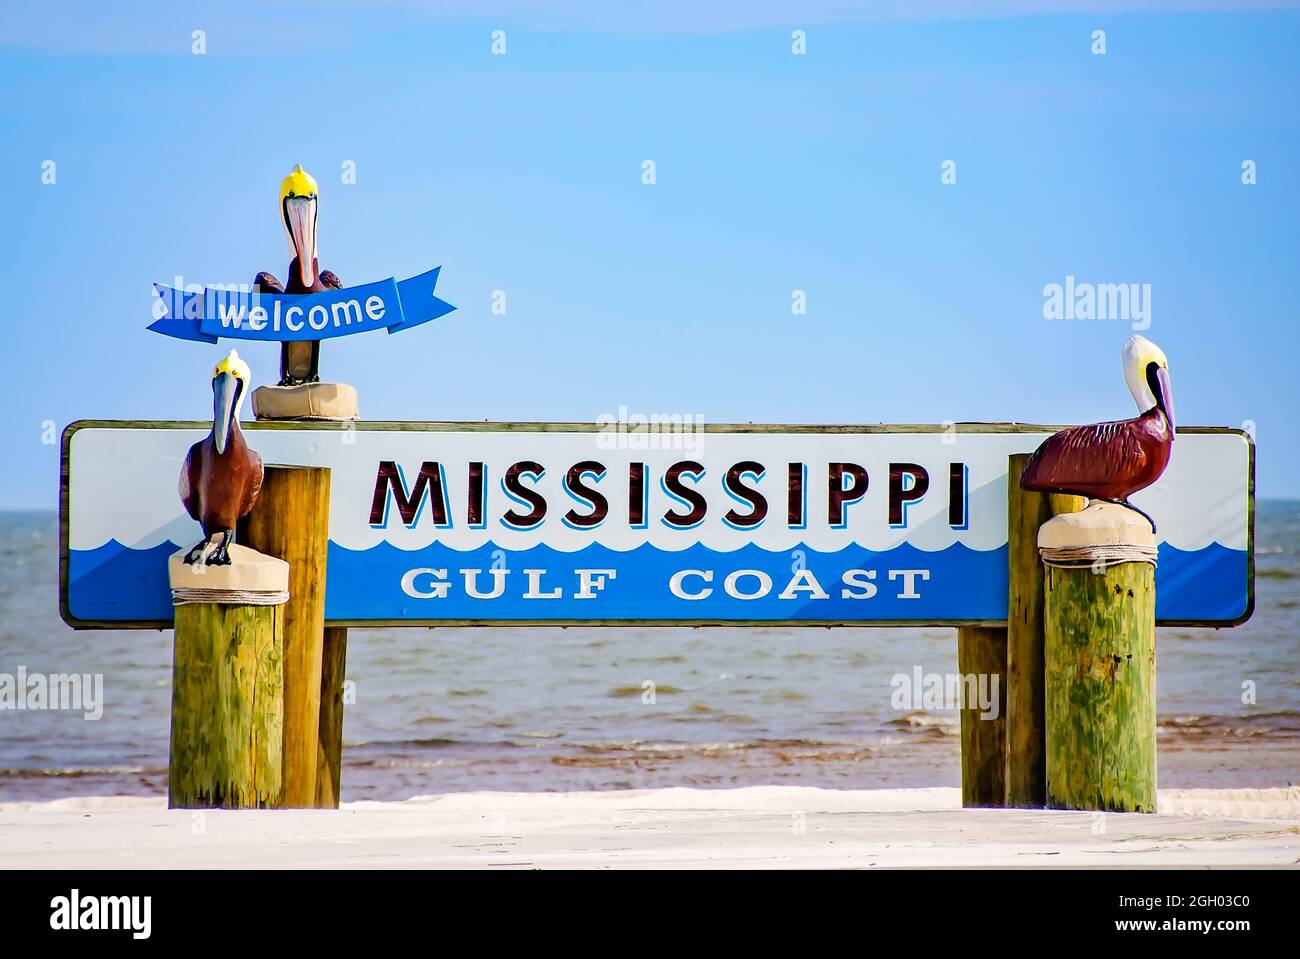 The Mississippi Gulf Coast welcome sign features brown pelicans, Aug. 31, 2021, in Gulfport, Mississippi. Stock Photo